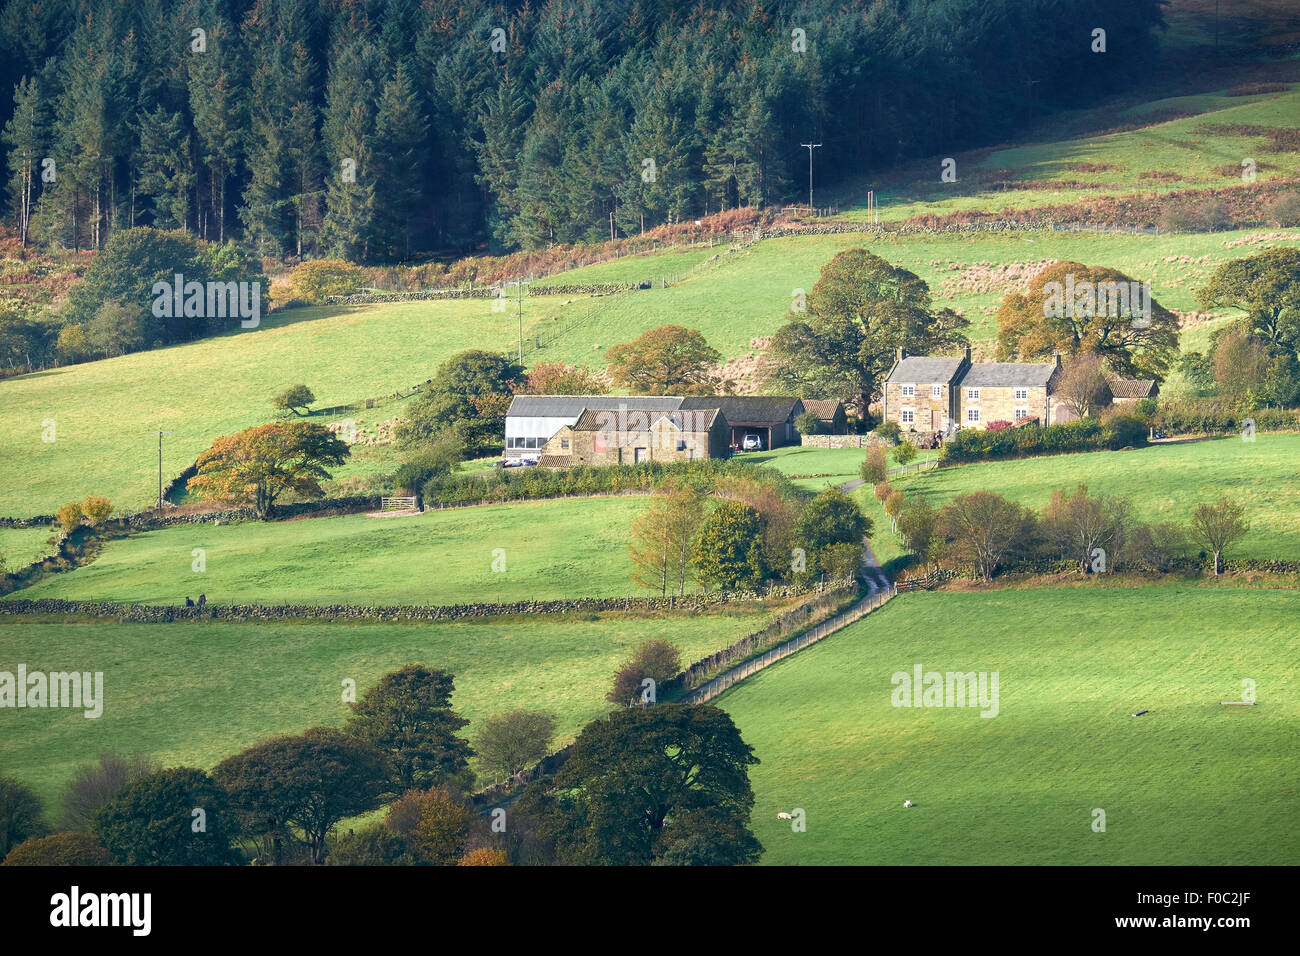 A farm in the rolling hills of North York Moors, North East England. UK. Stock Photo